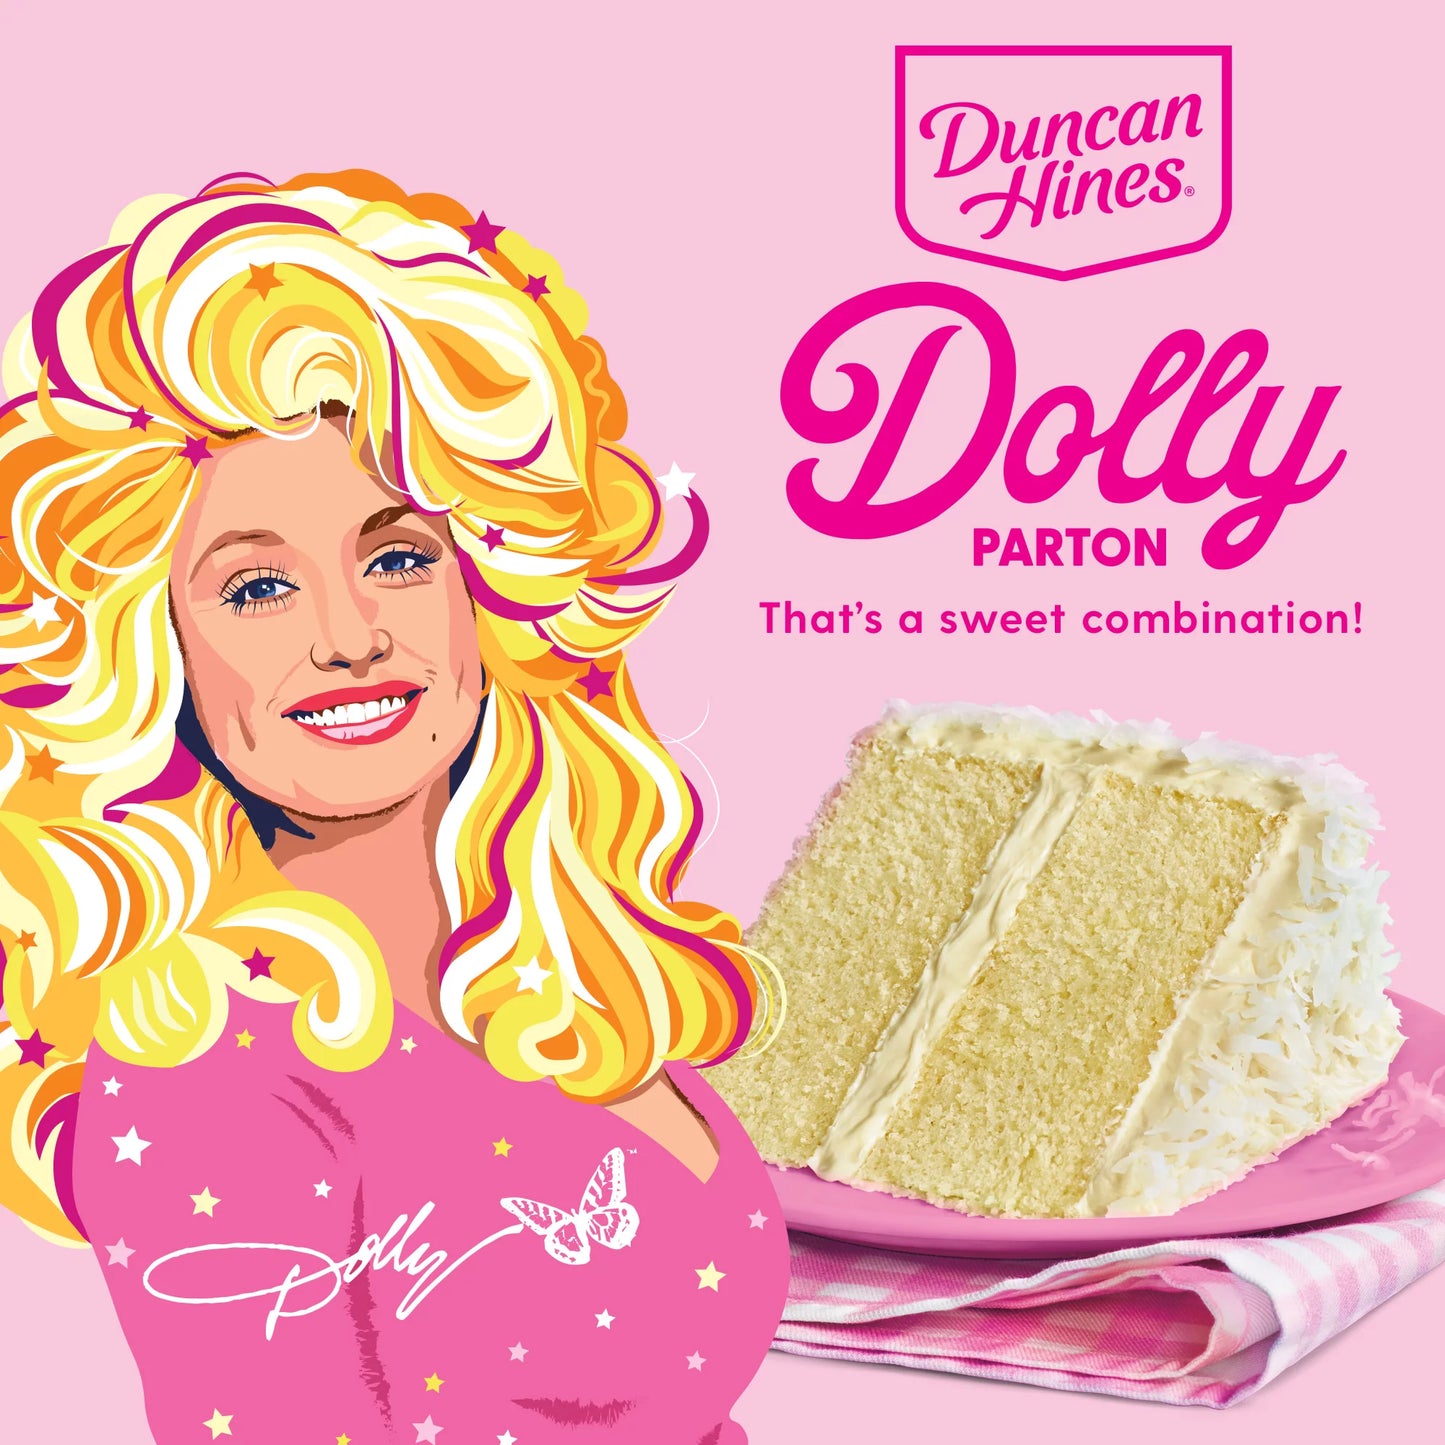 Duncan Hines Dolly Parton's Favorite Coconut Flavored Cake Mx 15.25oz